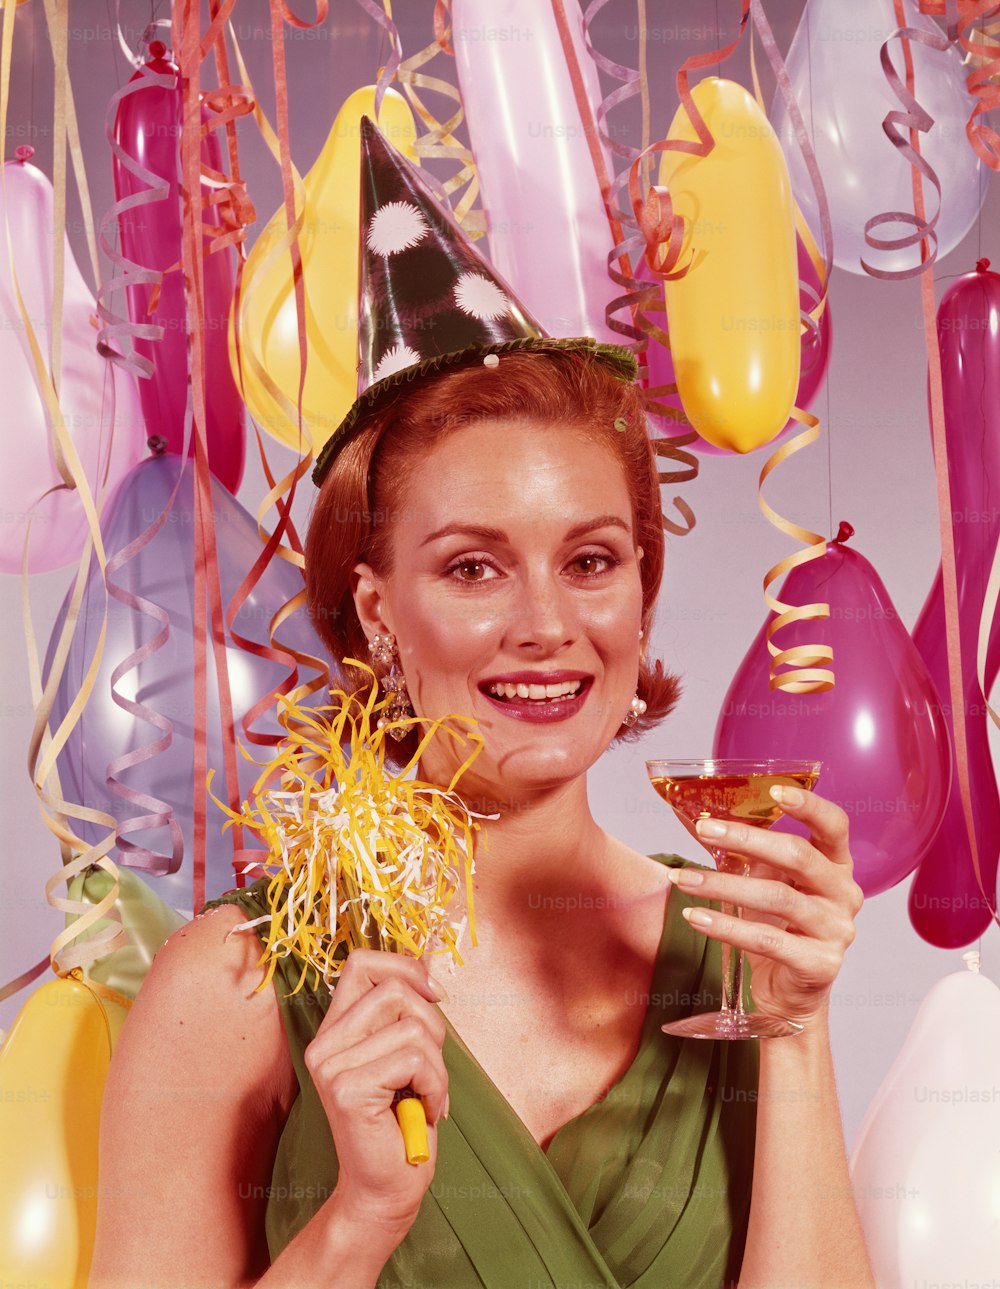 UNITED STATES - CIRCA 1960s:  Woman wearing paper party hat, holding glass of champagne.